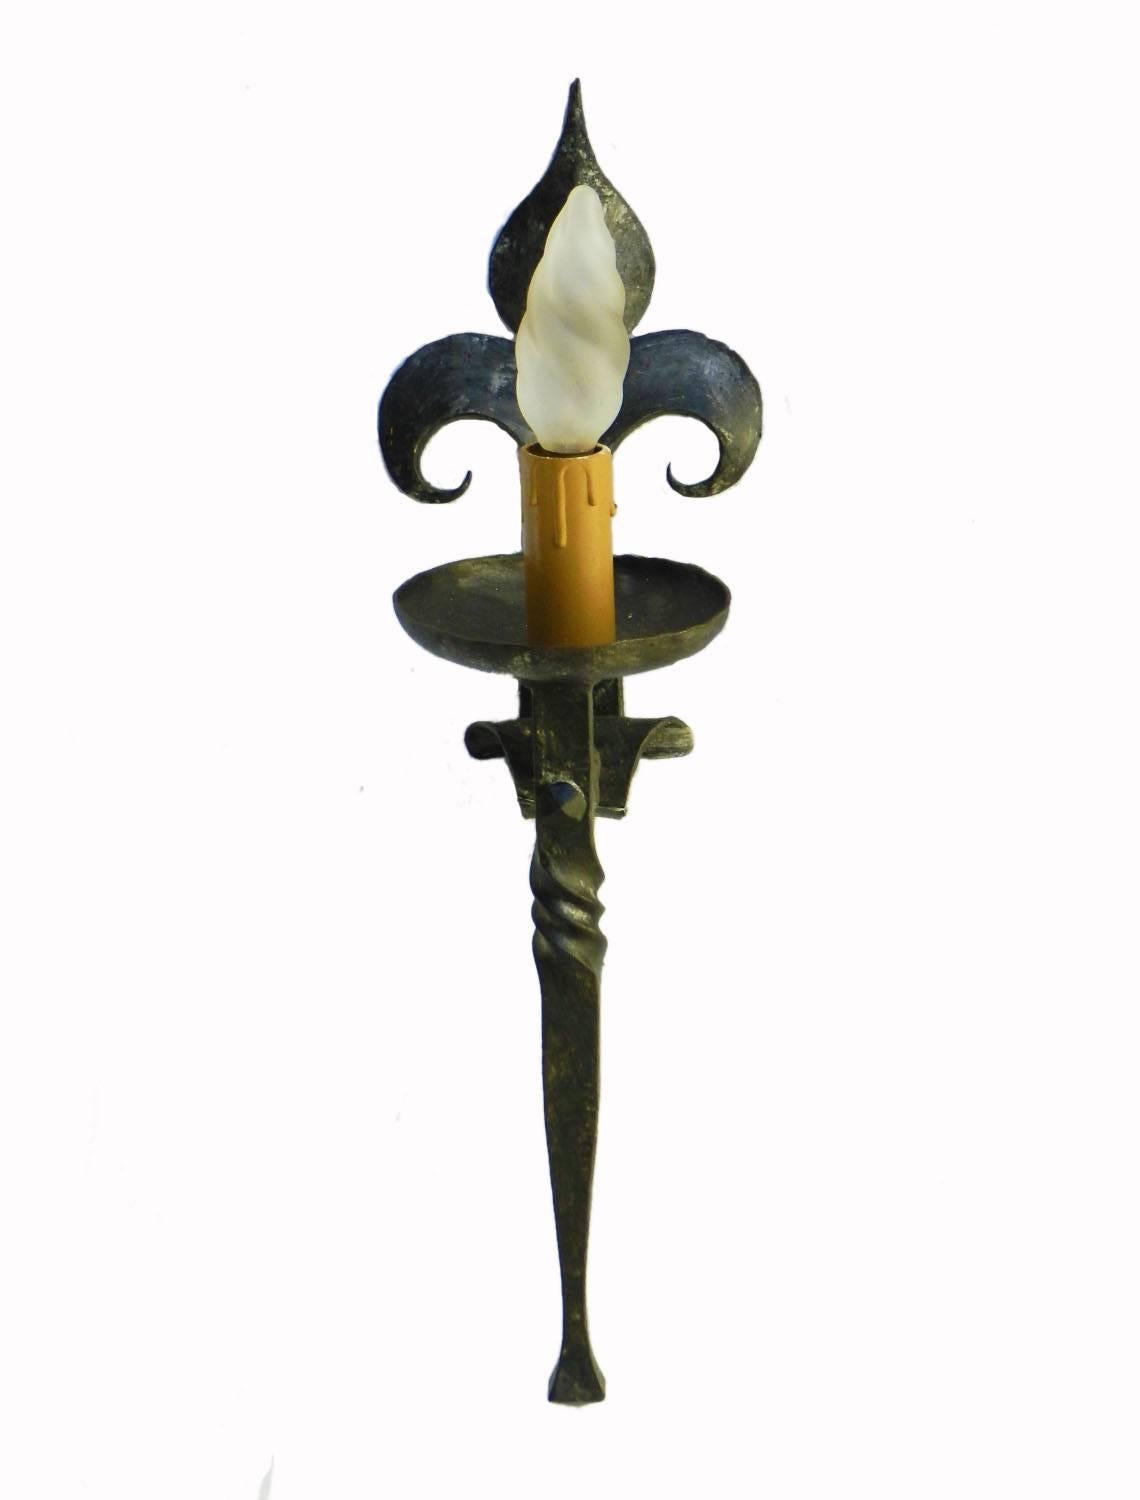 Superb wrought iron Arts & Crafts wall light applique sconce
torchere.
Fleur-de-lys
French Artisan hand made heavy iron.
Great patina through age.
This will be re-wired and tested to USA or UK and European standards ready to install, or for